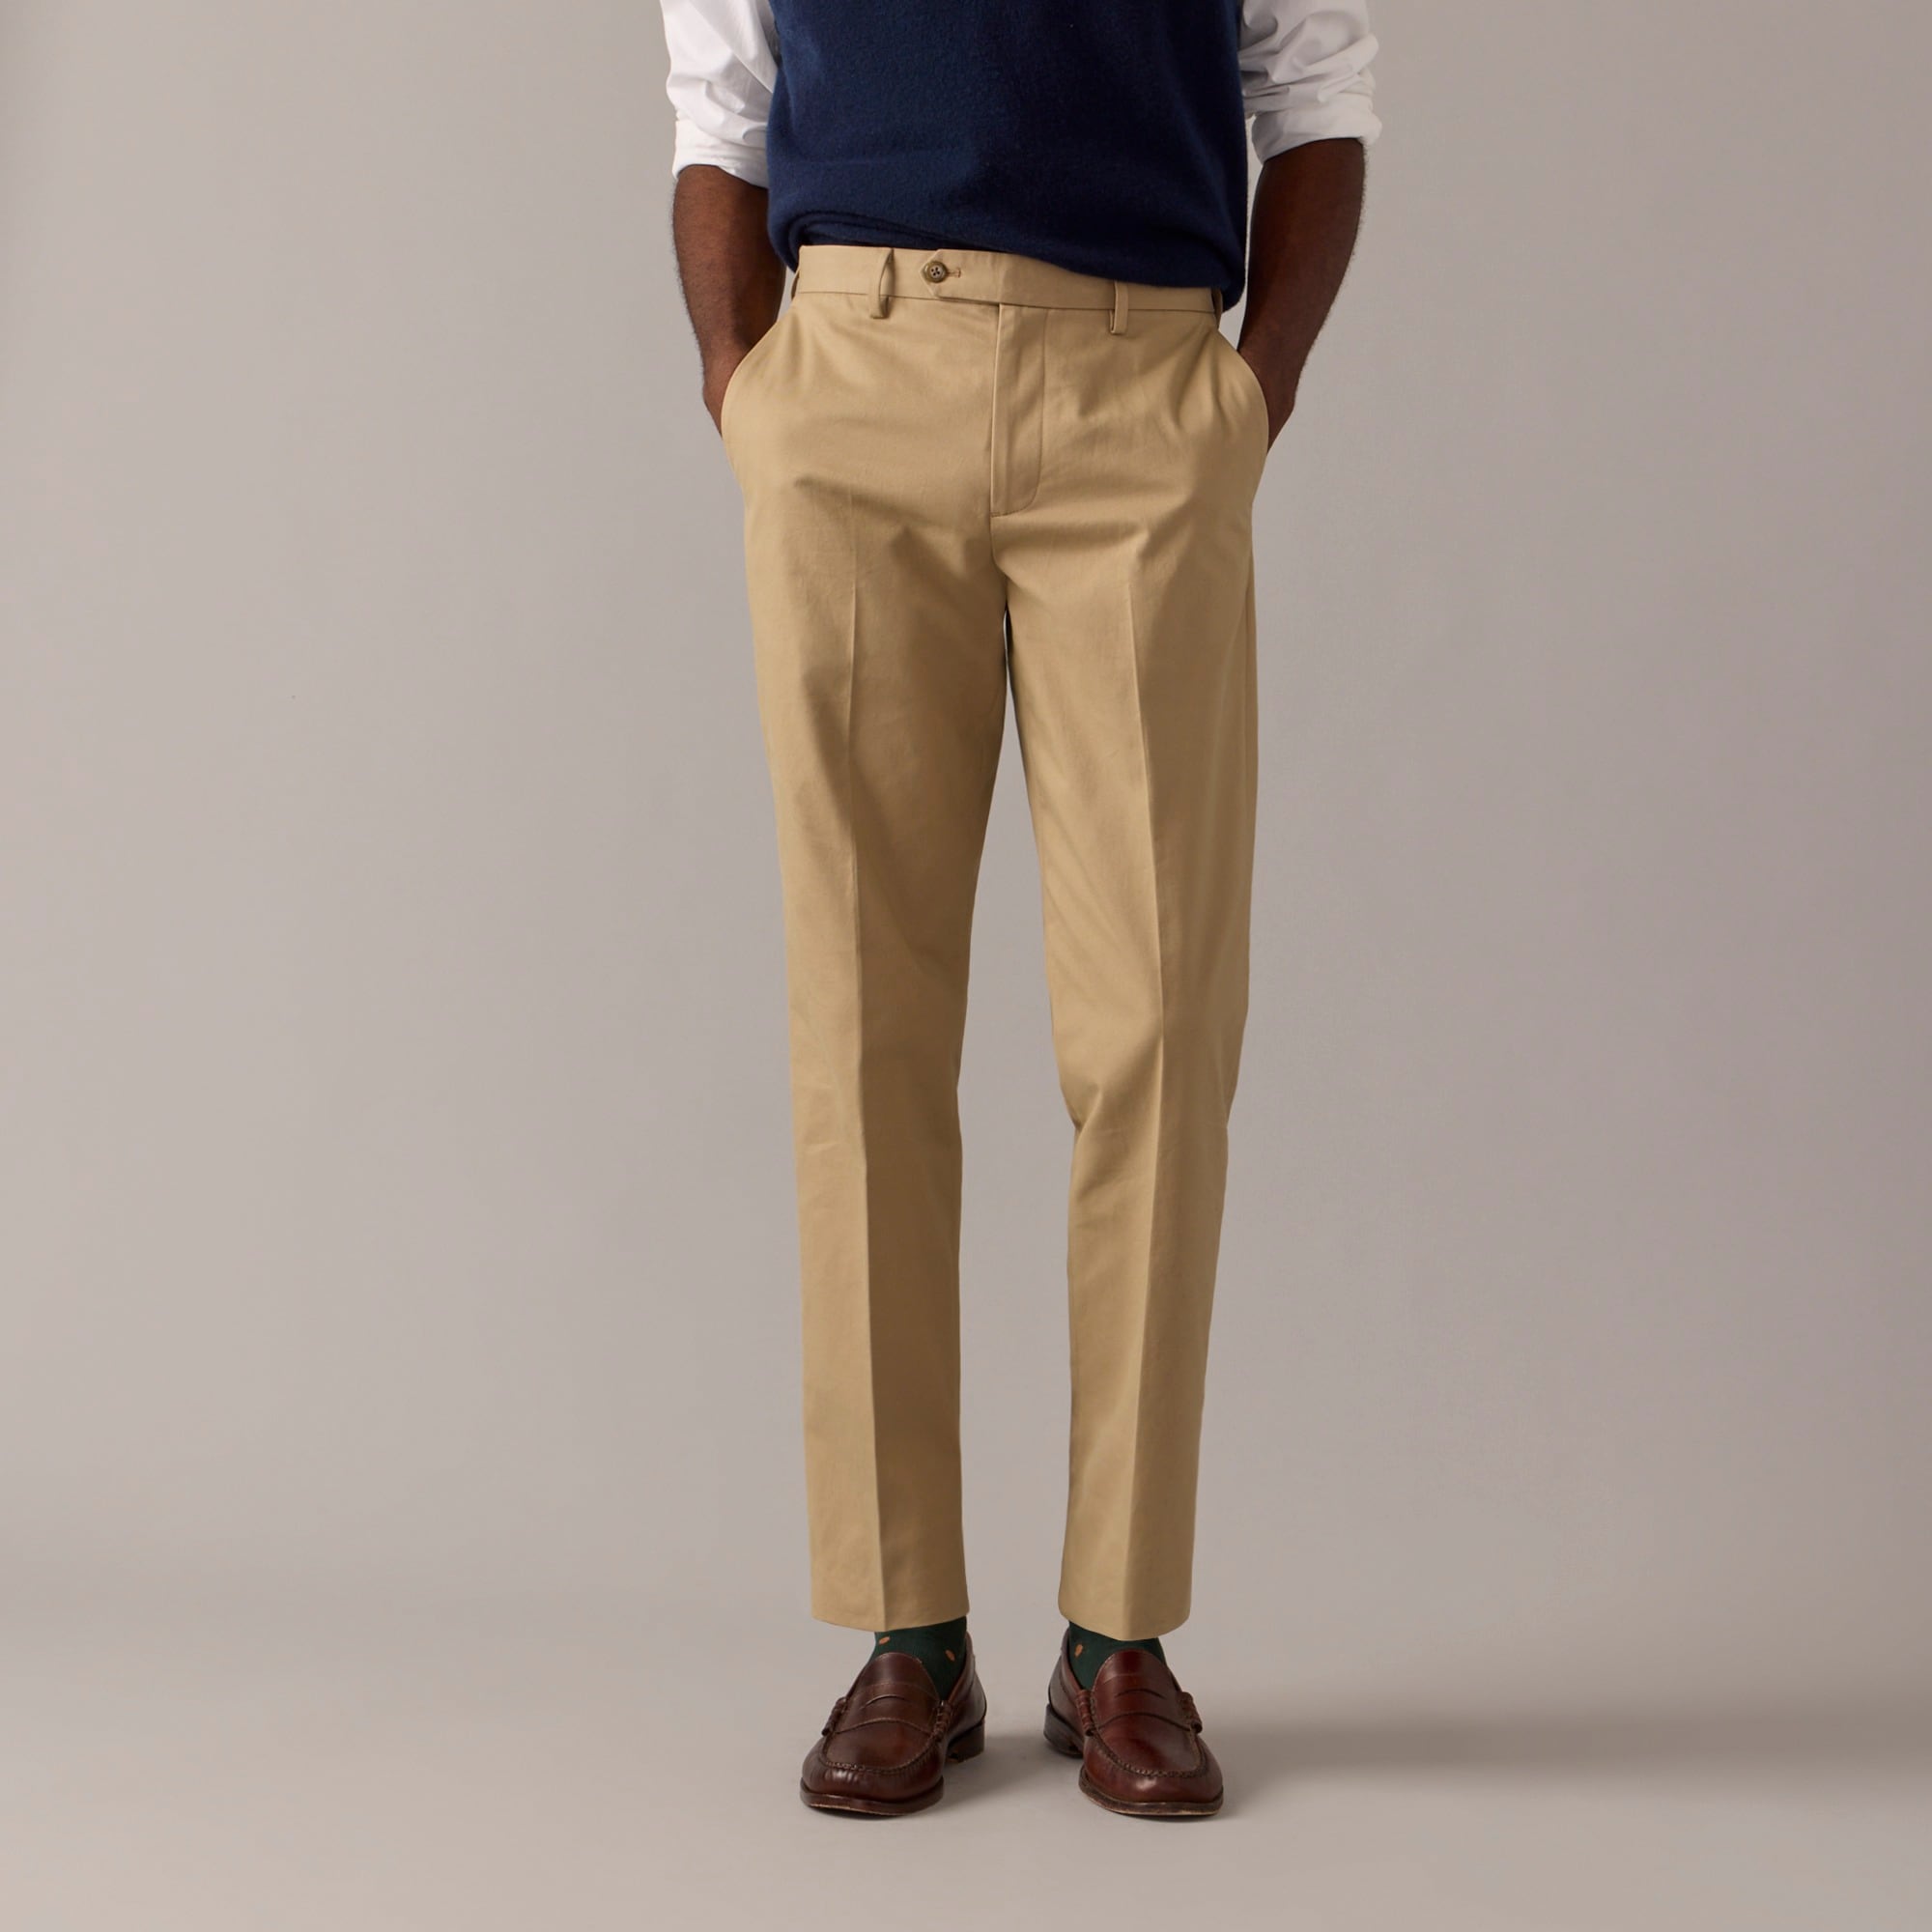  Bowery dress pant in stretch chino